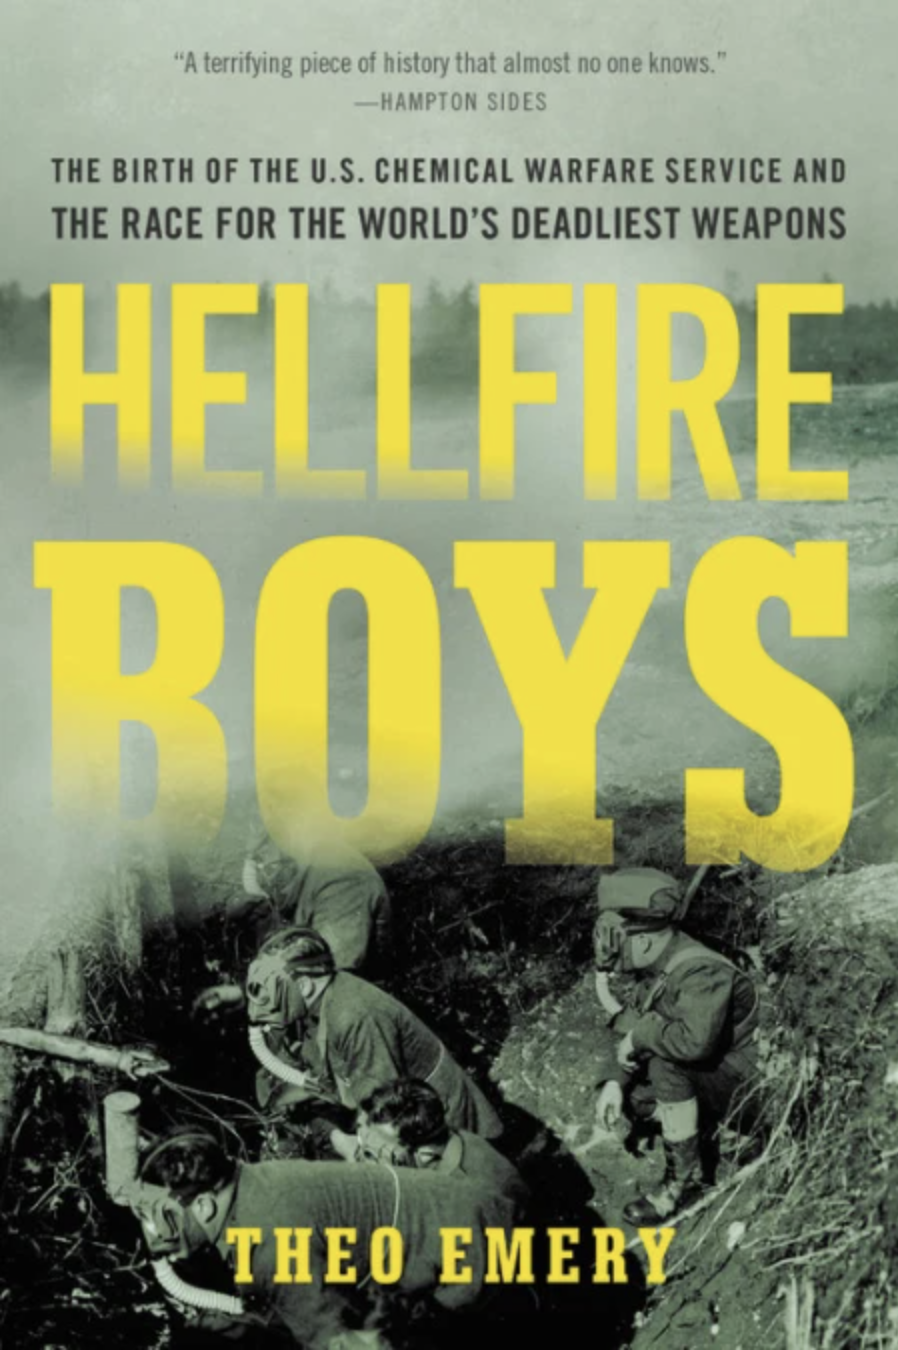 heo Emery author of Hellfire Boys: The Birth of the U.S. Chemical Warfare Service and the Race for the World’s Deadliest Weapons